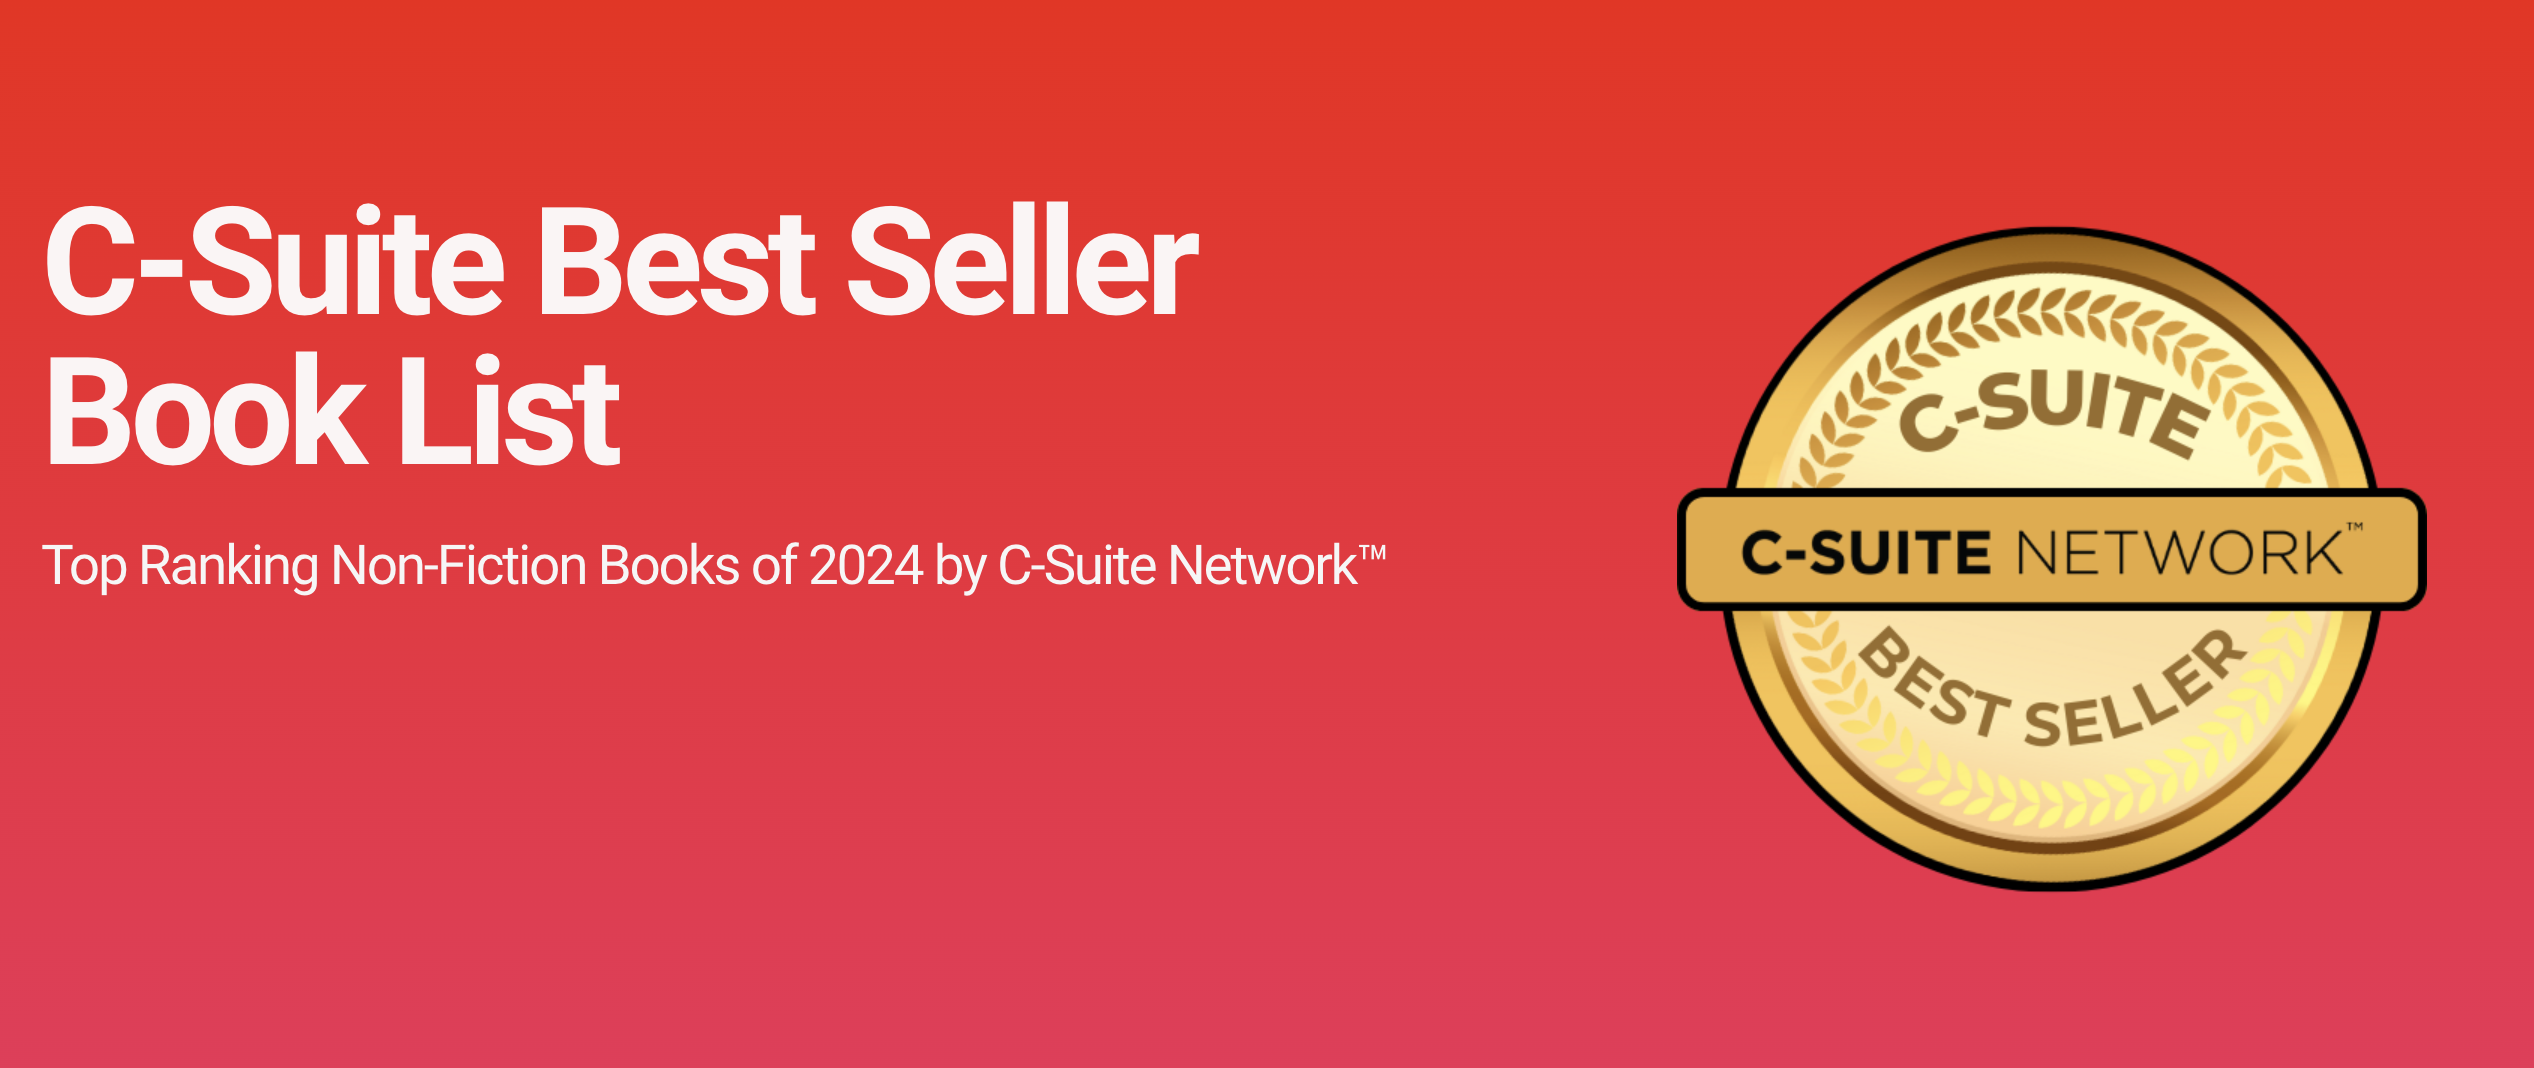 Best Seller Book List by C-SUITE NETWORK